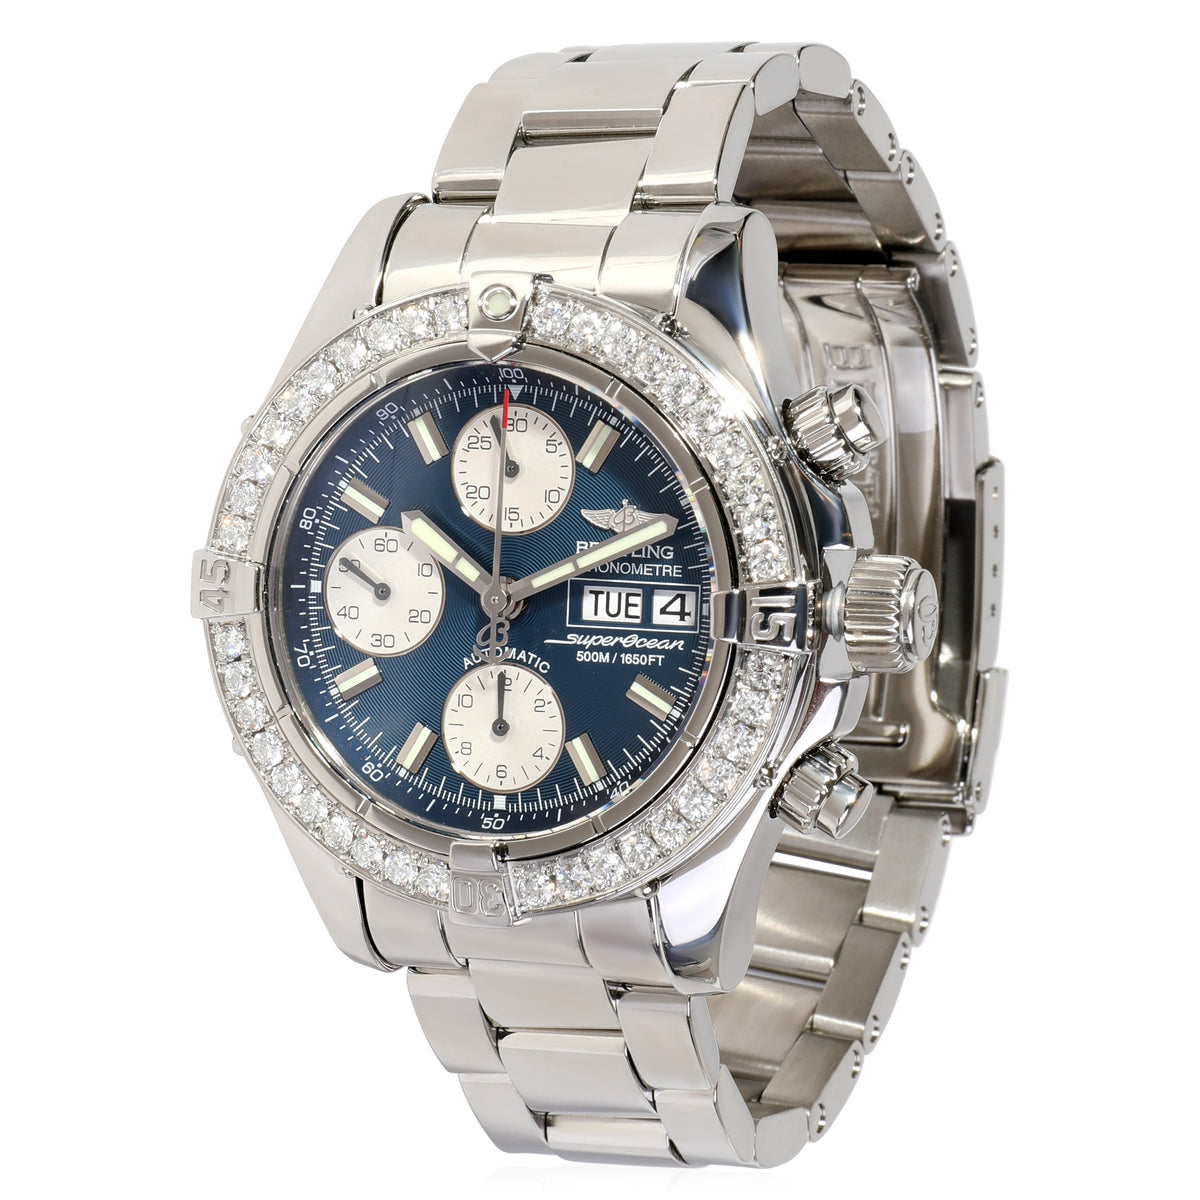 Breitling Superocean Chronograph A13340 Men's Watch in  Stainless Steel